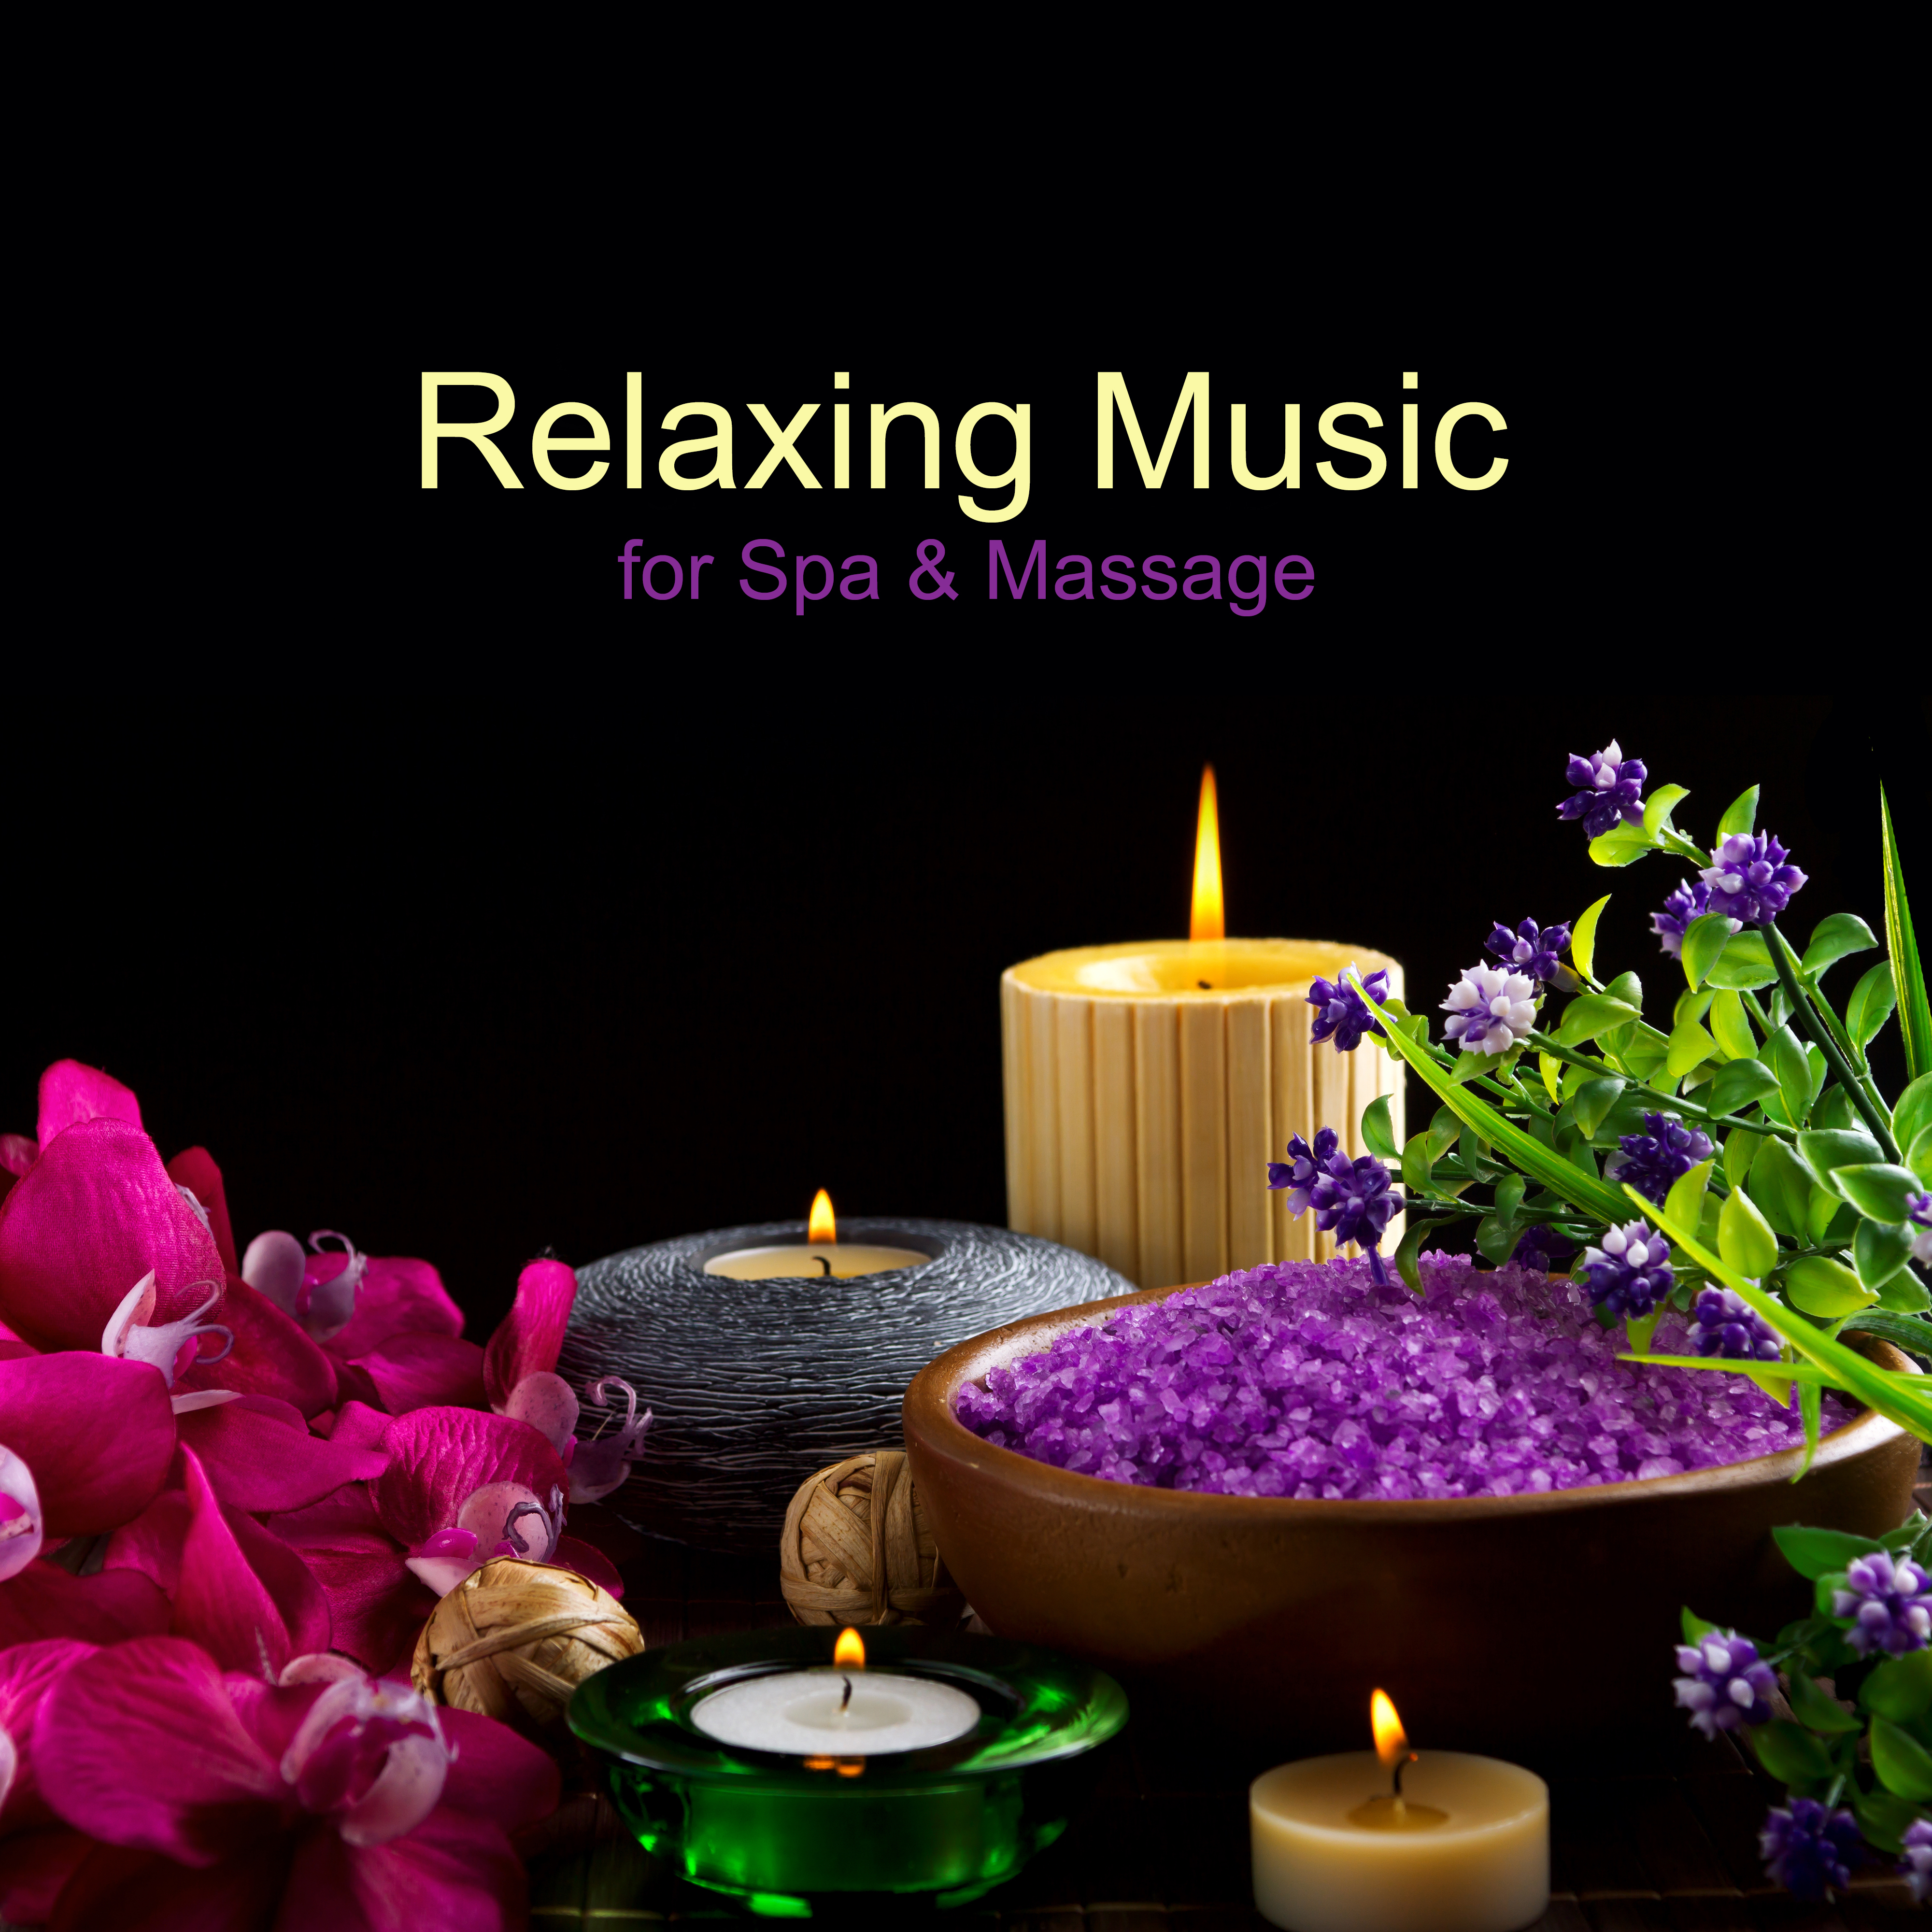 Relaxing Music for Spa & Massage